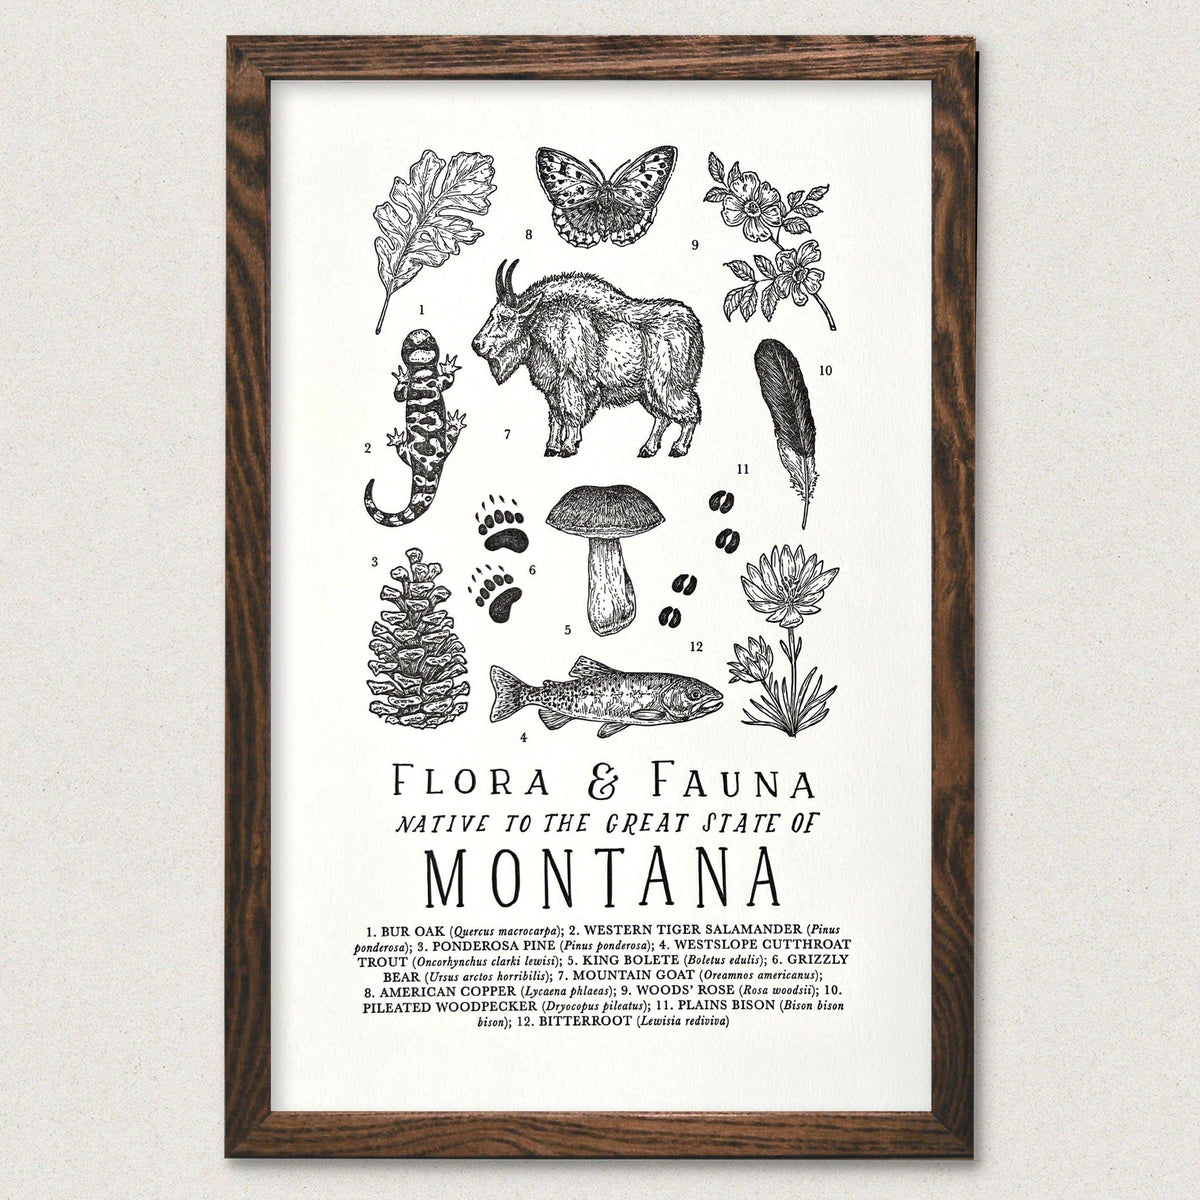 A Montana Field Guide Letterpress Print of various animals and plants by The Wild Wander.